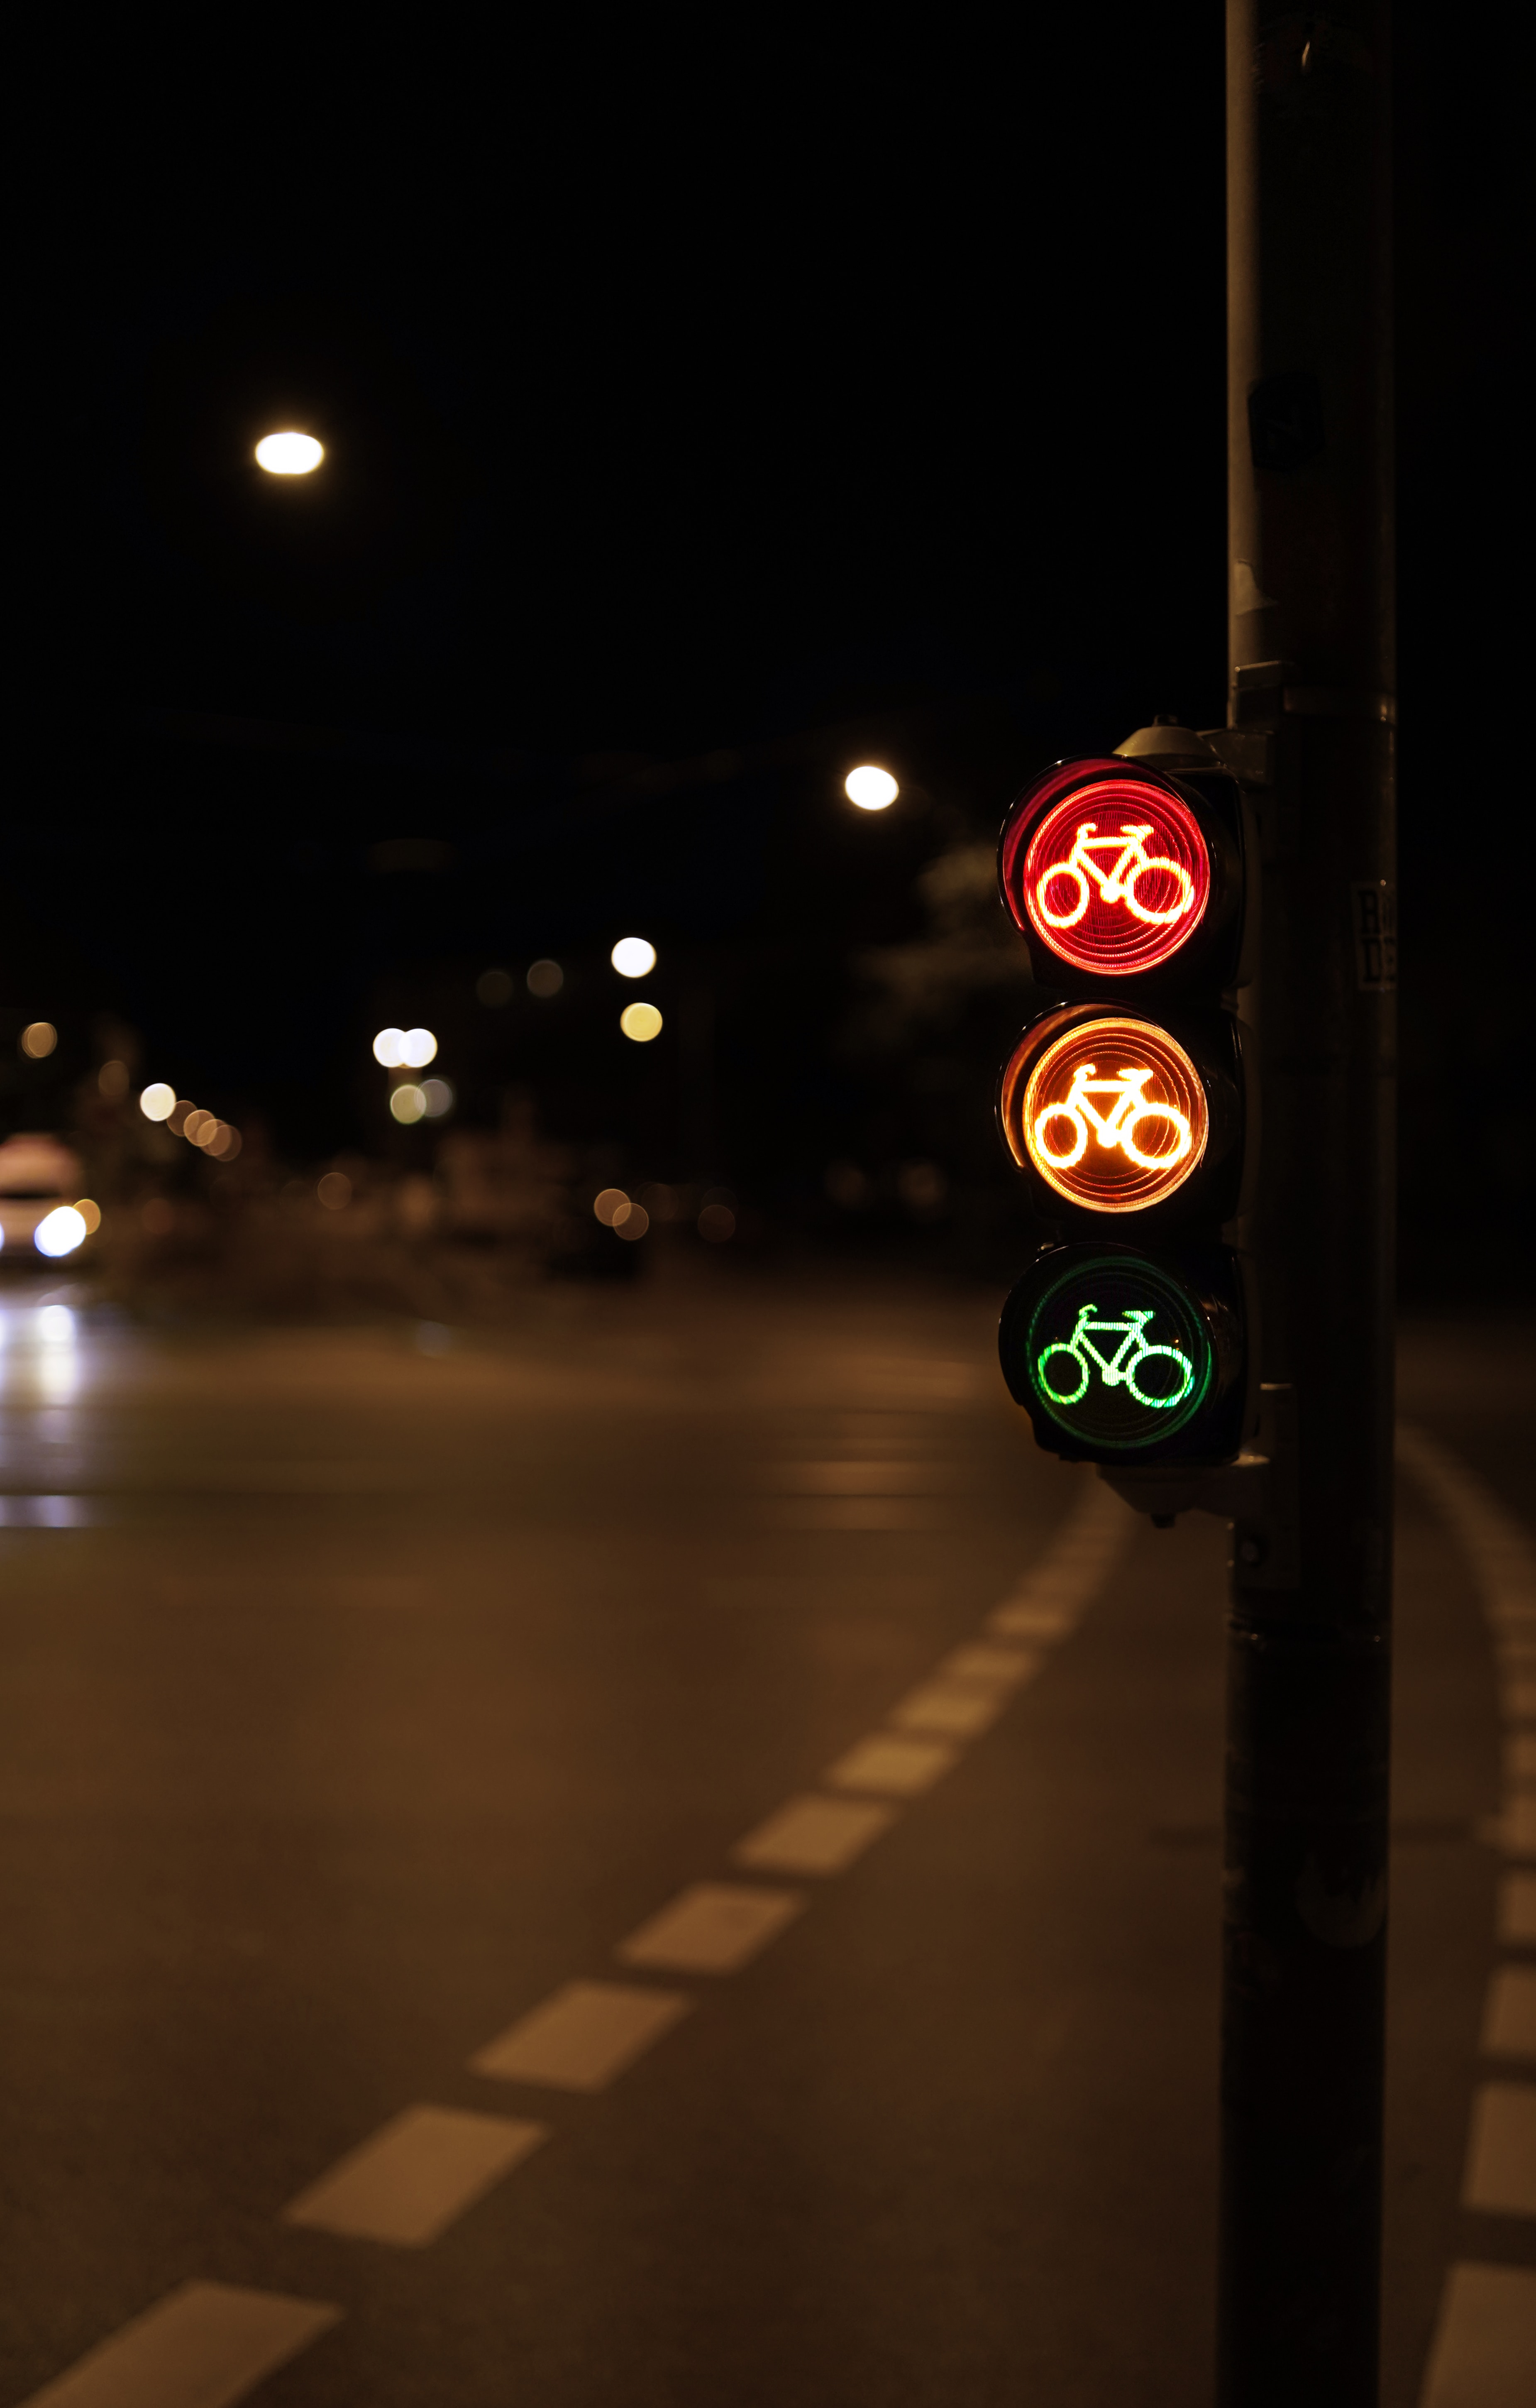 android symbol, miscellaneous, miscellanea, night, glow, bicycle, traffic light